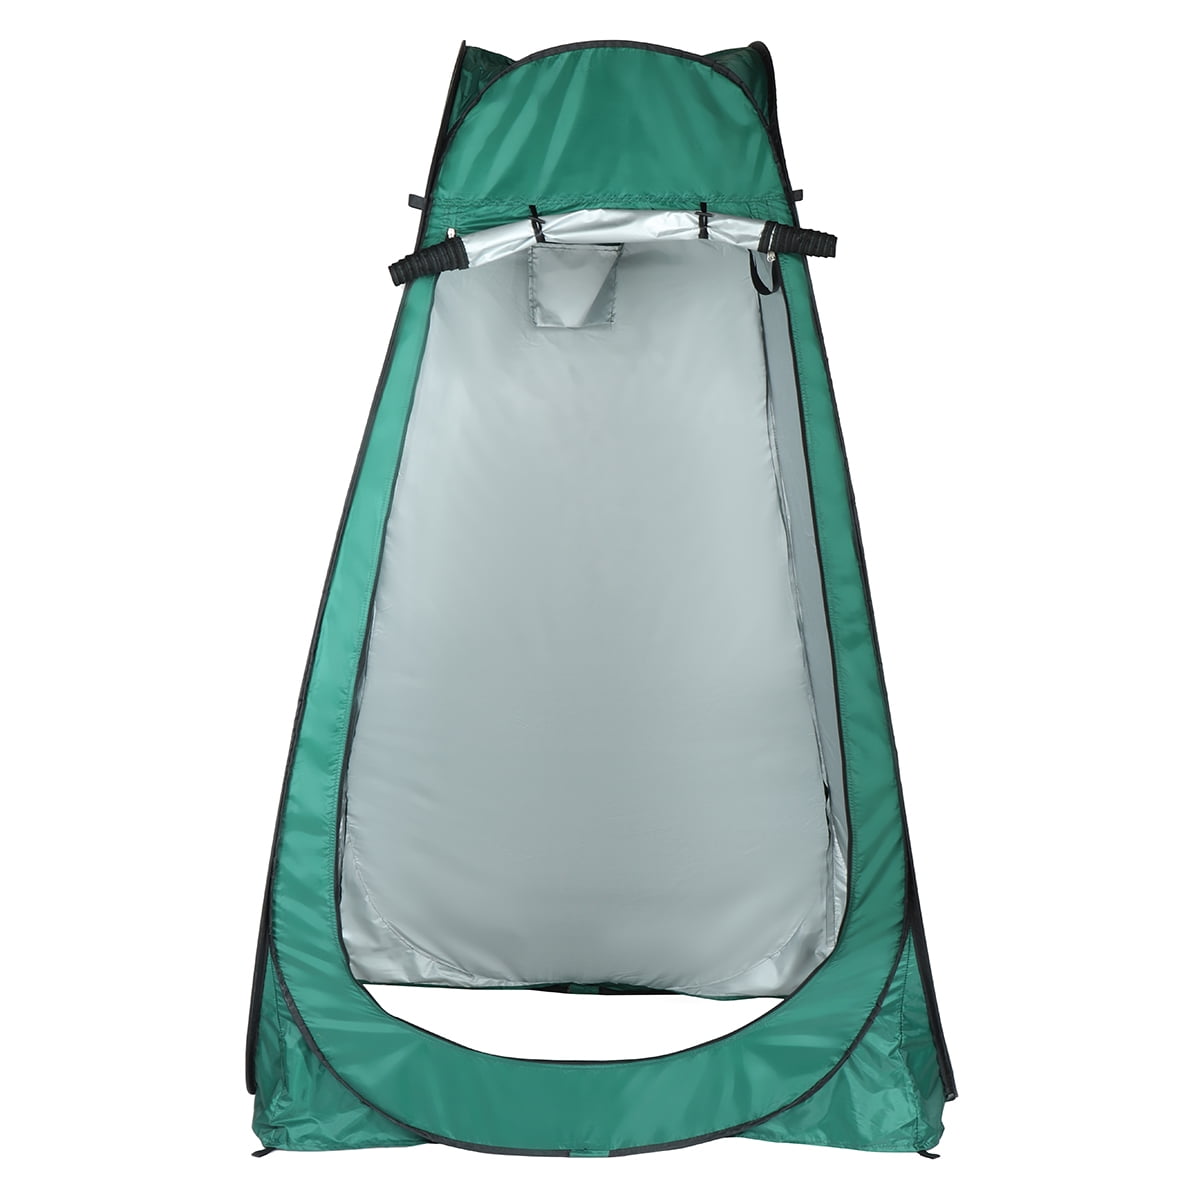 Details about   Pop Up Pod Changing Room Privacy Tent Instant Portable Outdoor Shower Tent Camp 